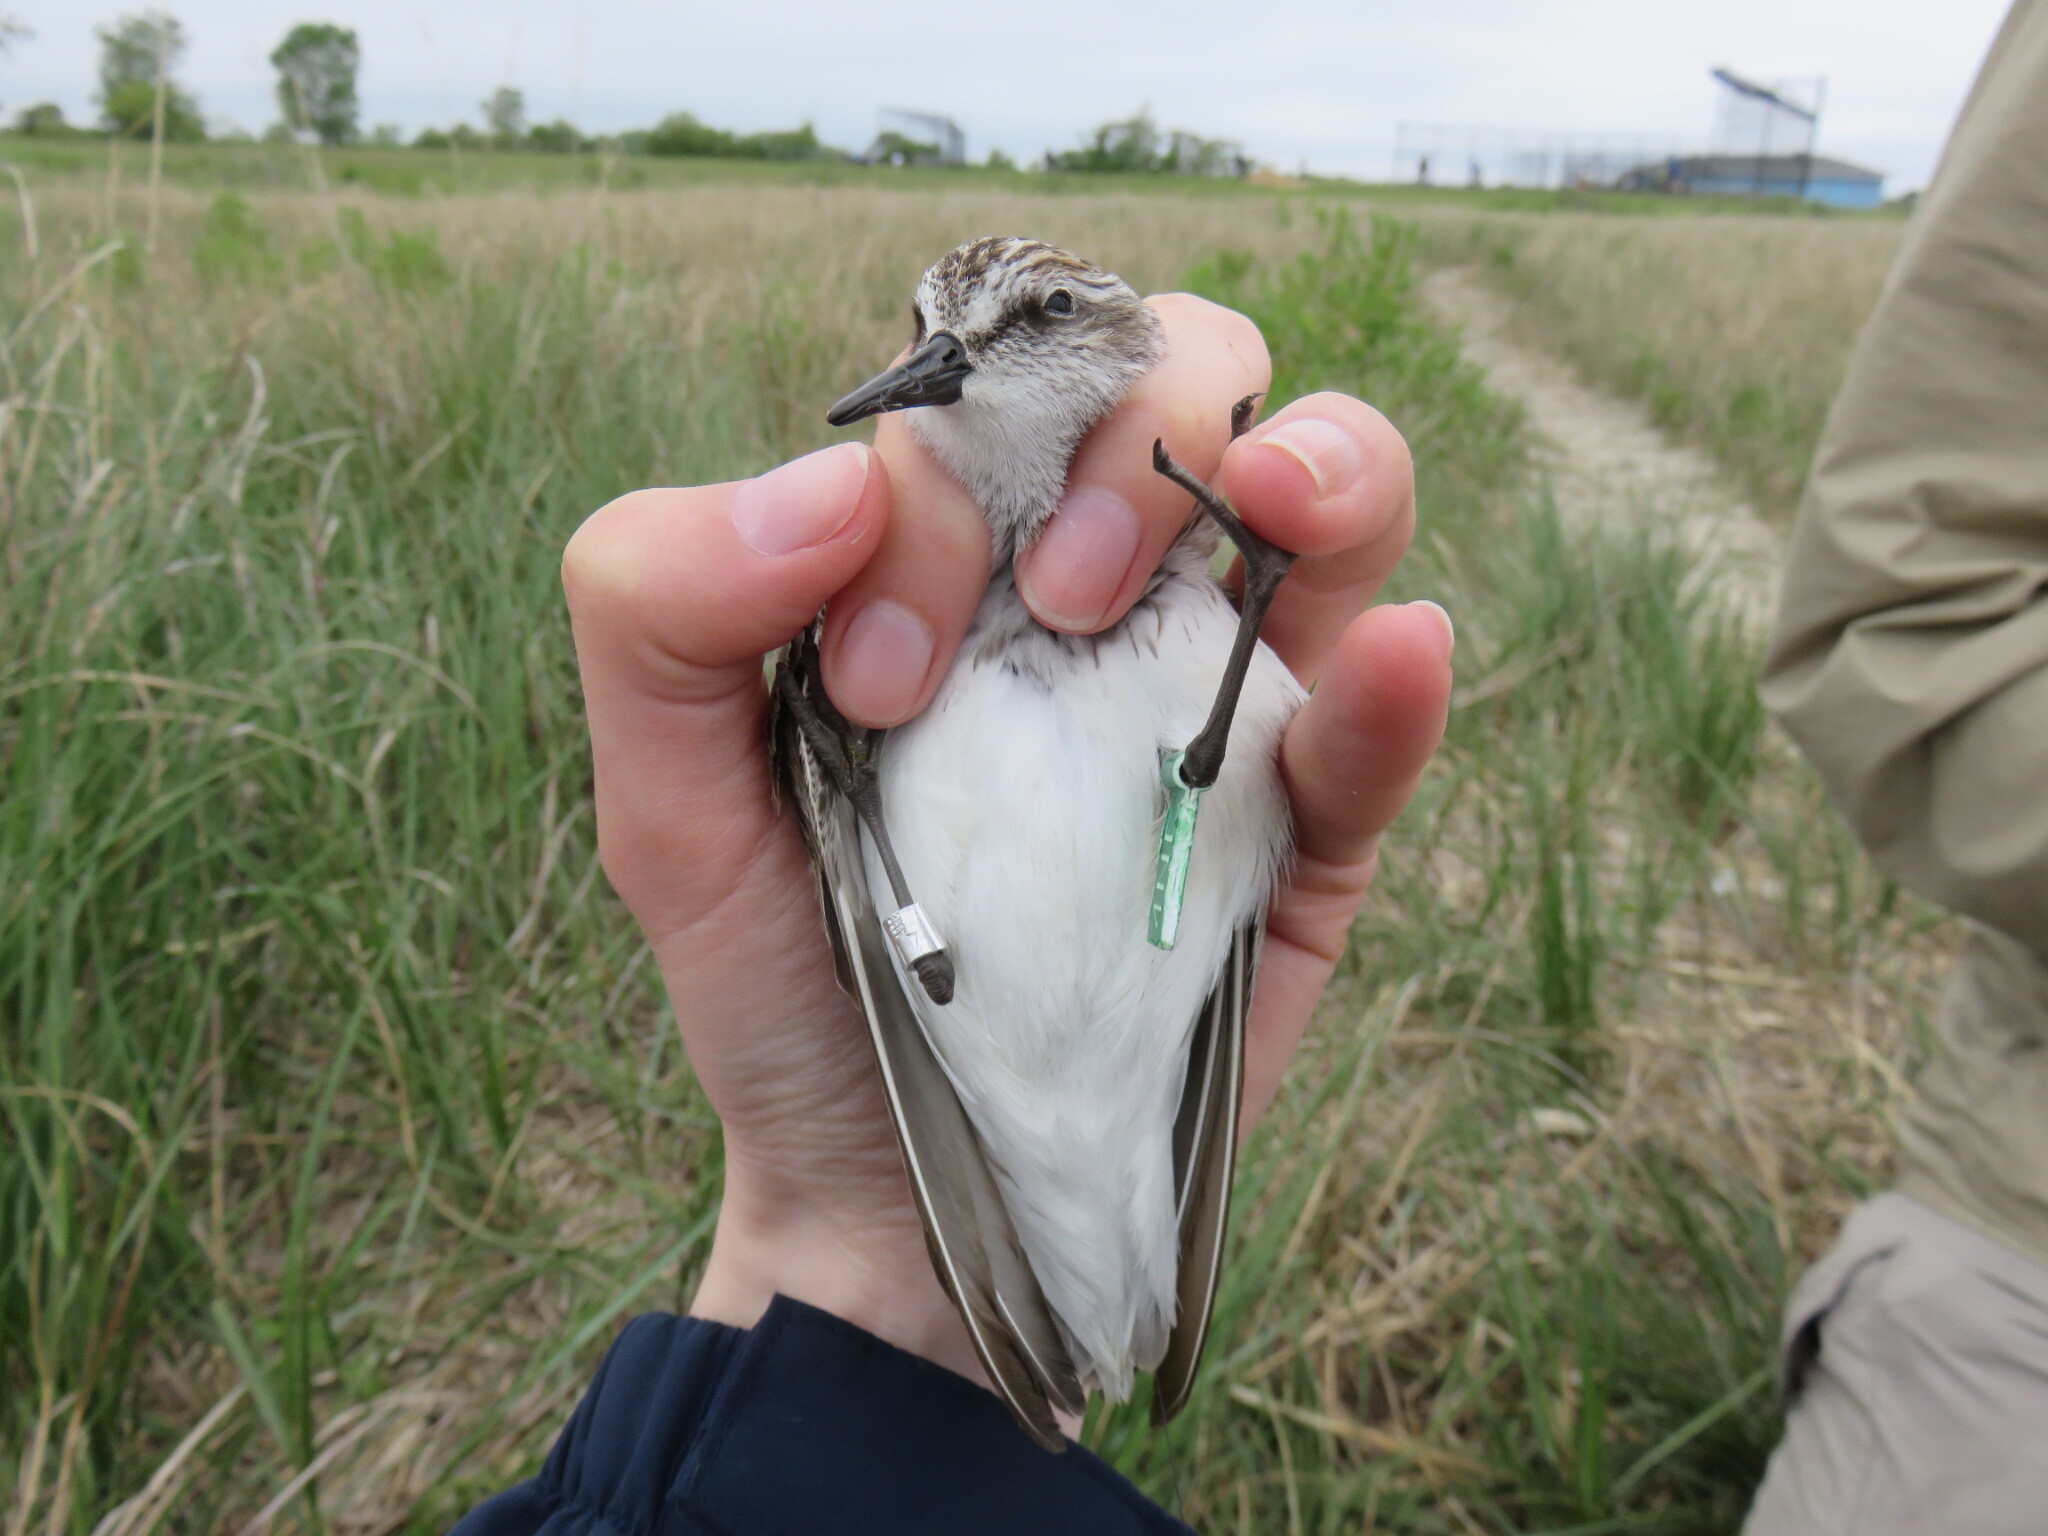 A Semipalmated Sandpiper is fitted with light-weight tags that will allow tracking of its movements during both migration and the breeding season. Photo: NYC Audubon